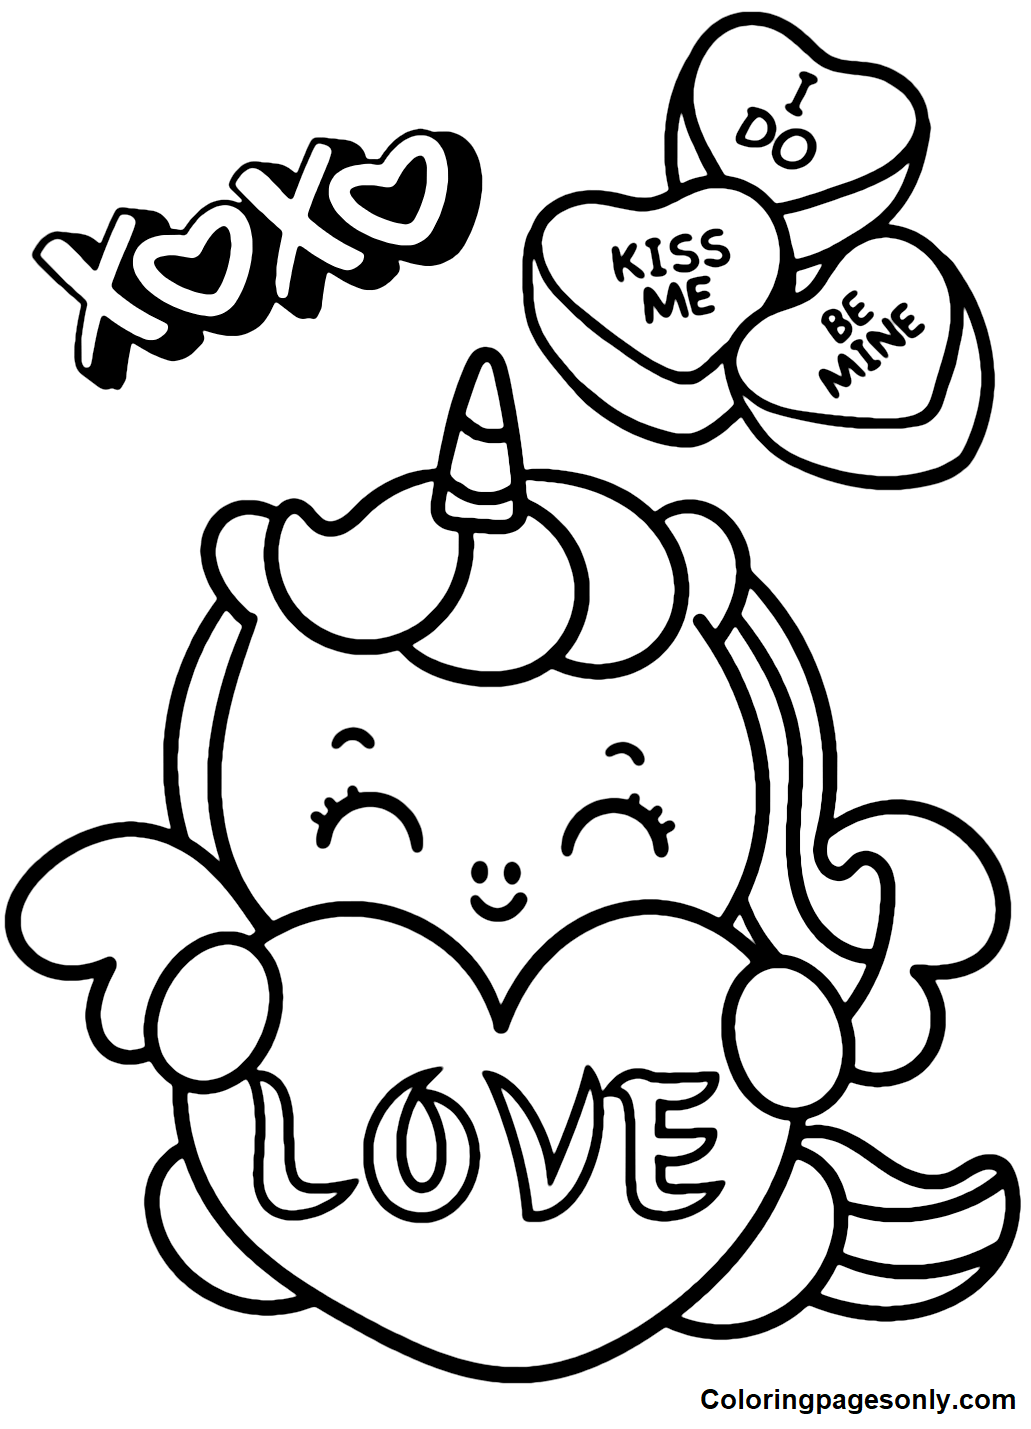 Unicorn with Heart in Valentine’s Day Coloring Pages